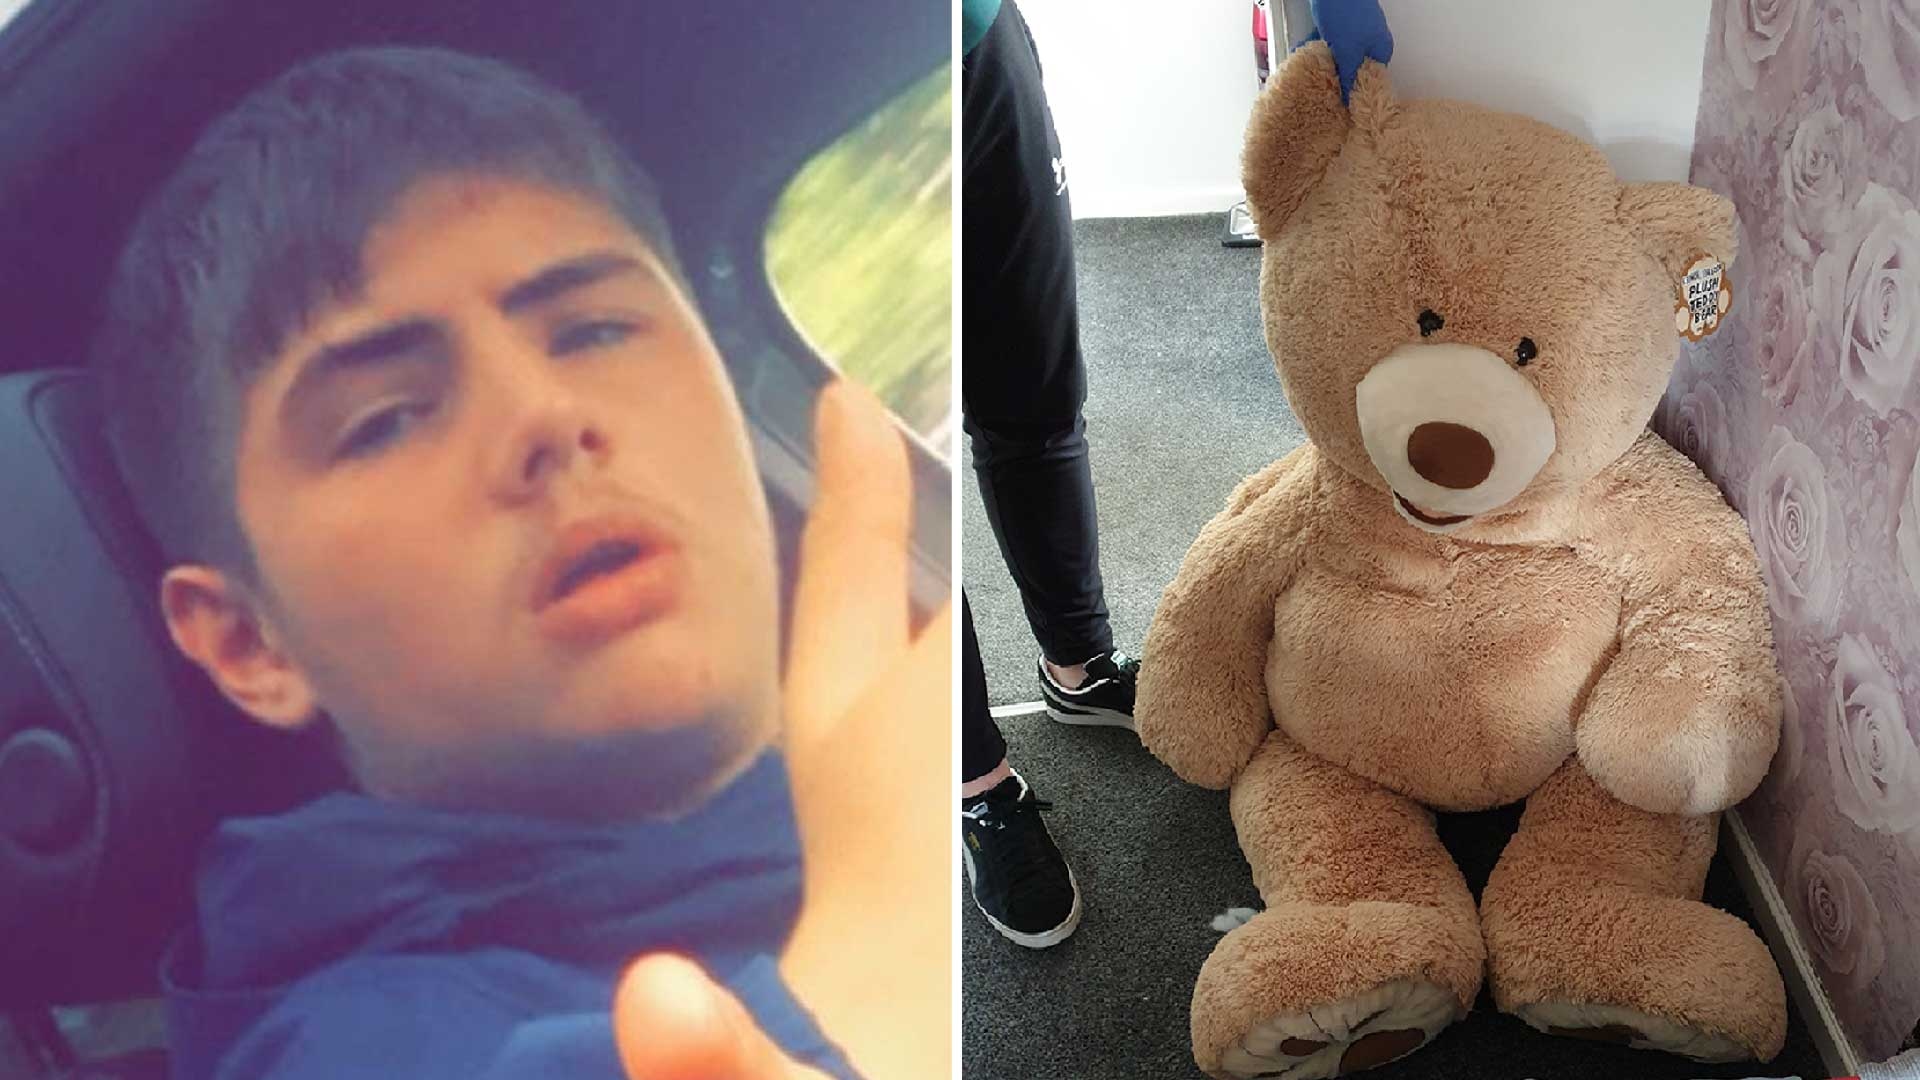 A Wanted Man Was Arrested By Police After Huge Teddy Bear Found 'Breathing'